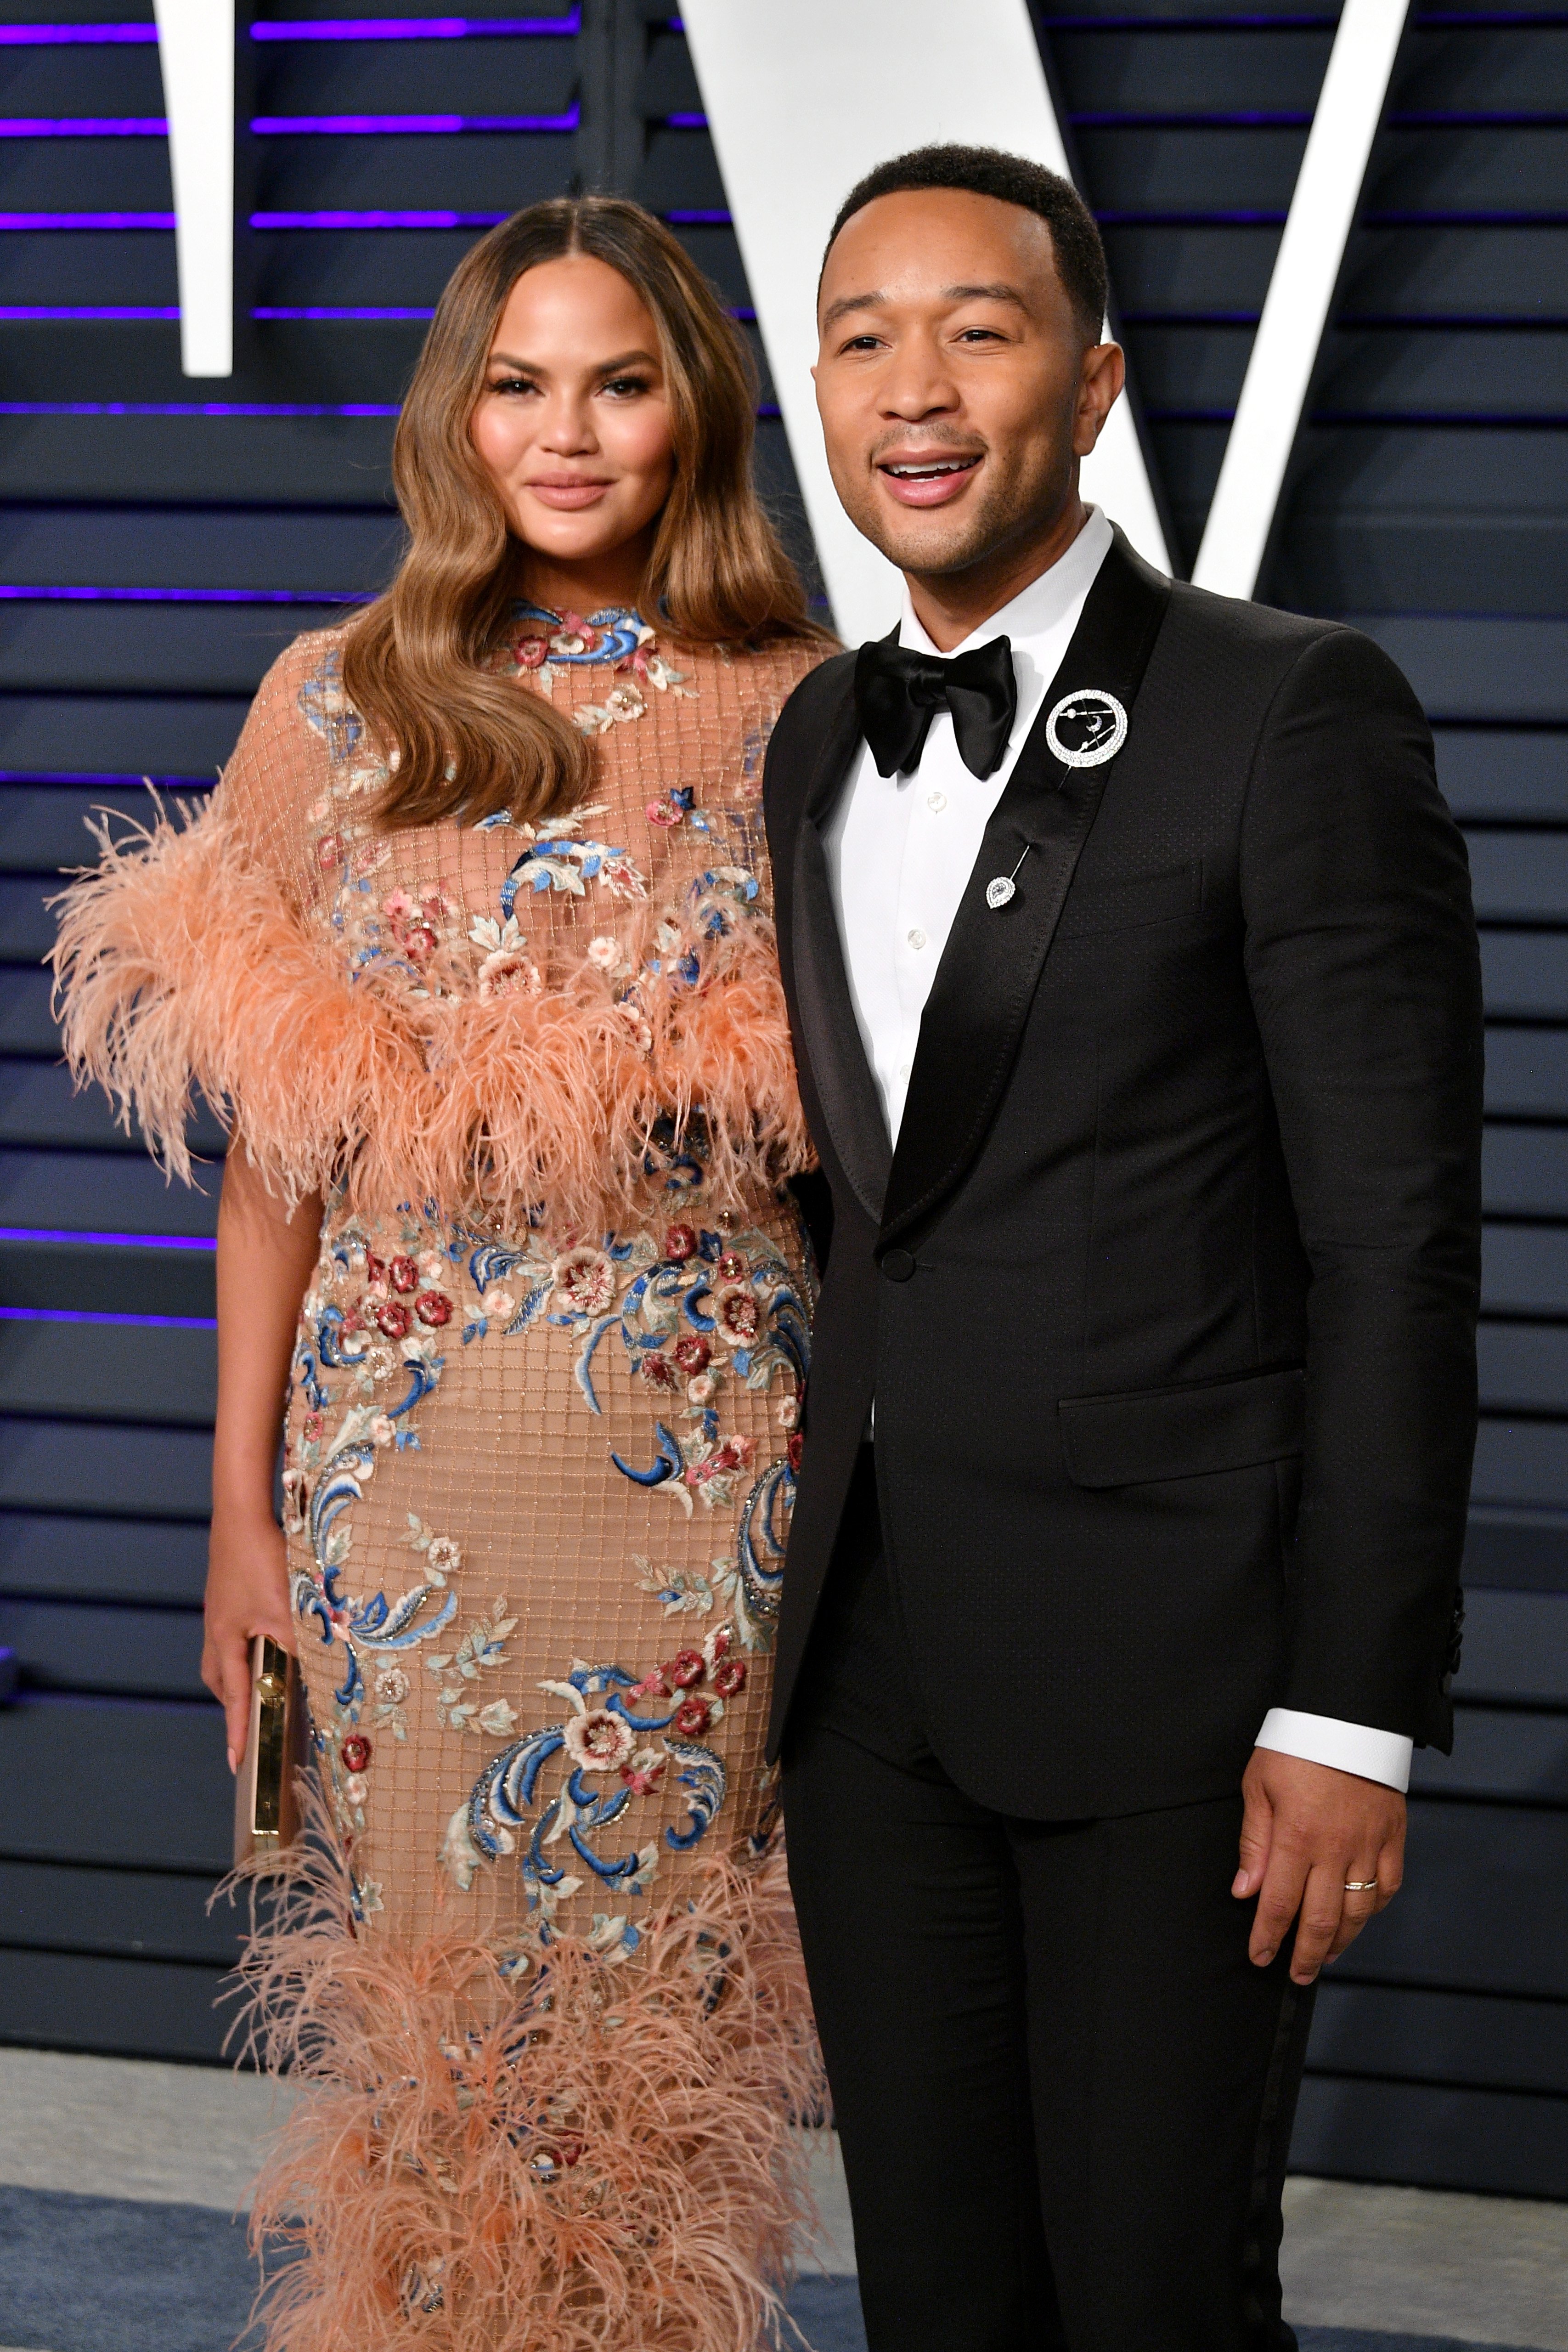 Chrissy Teigen and John Legend at the 2019 Vanity Fair Oscar Party on February 24, 2019 in Beverly Hills, California.  |  Source: Getty Images